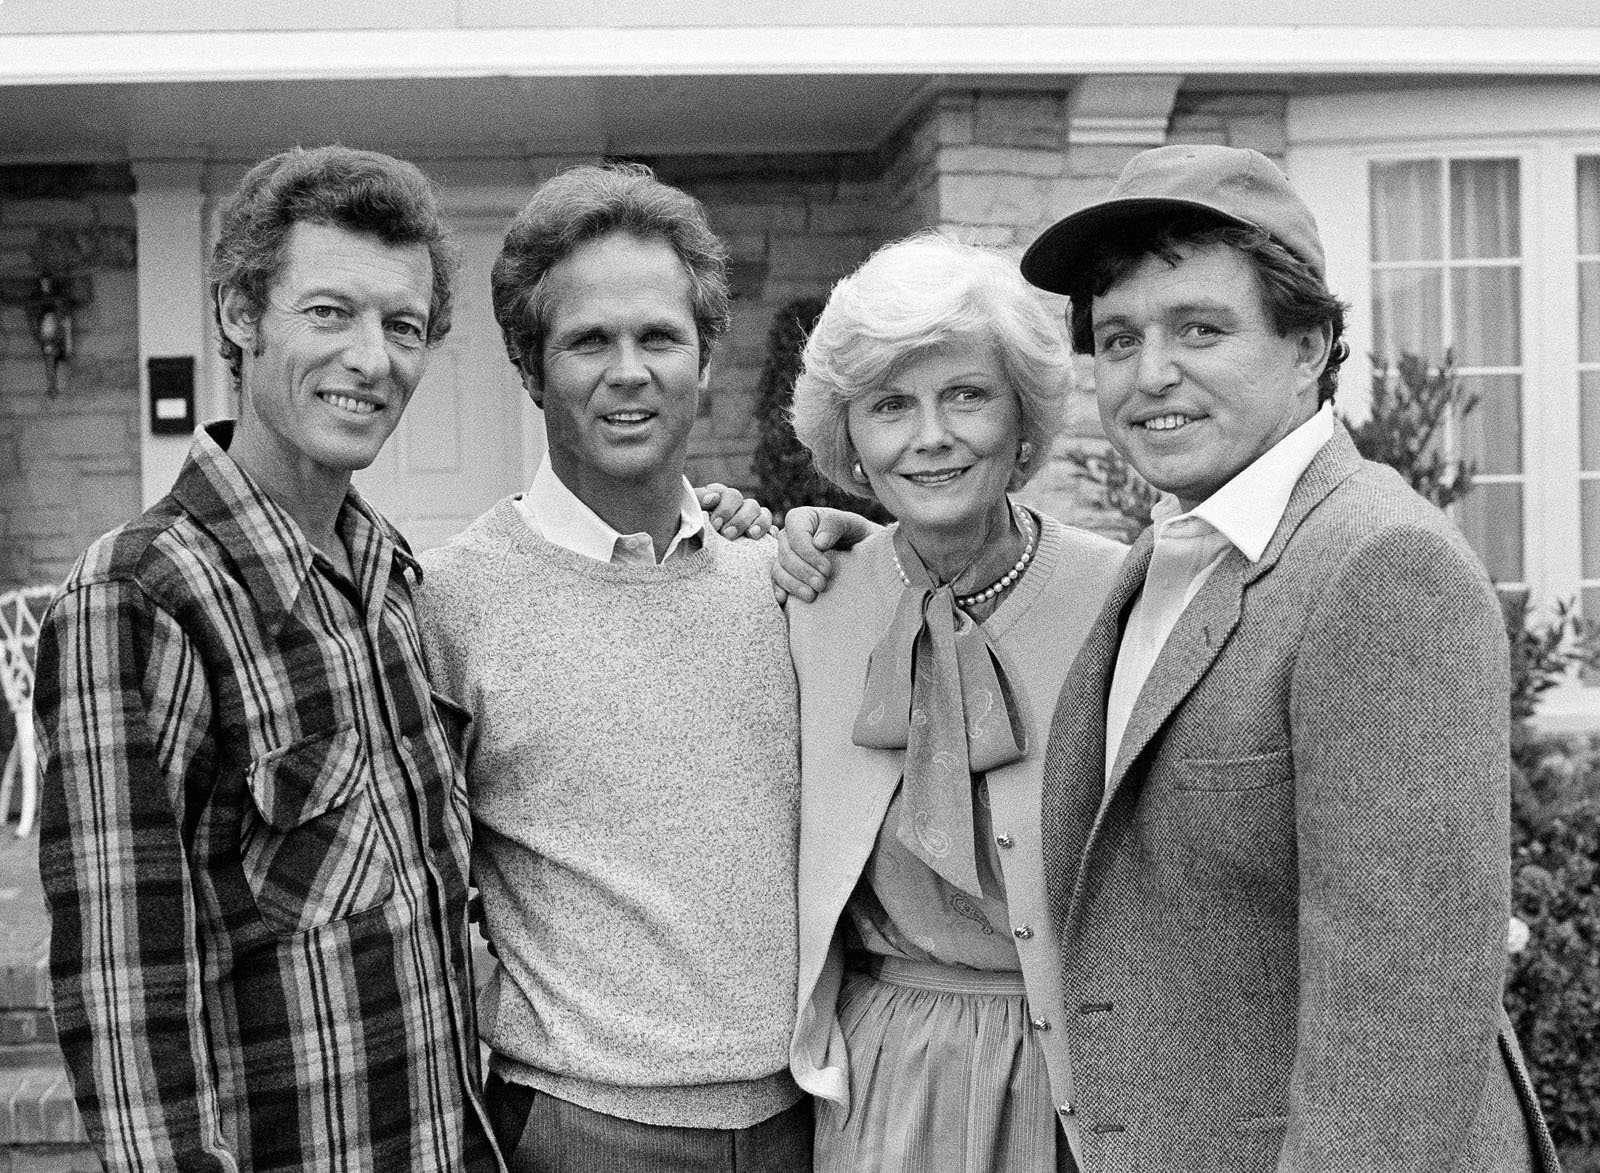 Members of the original cast of the "Leave It To Beaver" television series pause during filming of an upcoming TV special, "Still The Beaver," in Los Angeles on Dec. 10, 1982. From left to right are Ken Osmond, Tony Dow, Babara Billingsley and Jerry Mathers. Osmond died May 18, 2020. He was 76. (AP Photo/Wally Fong)